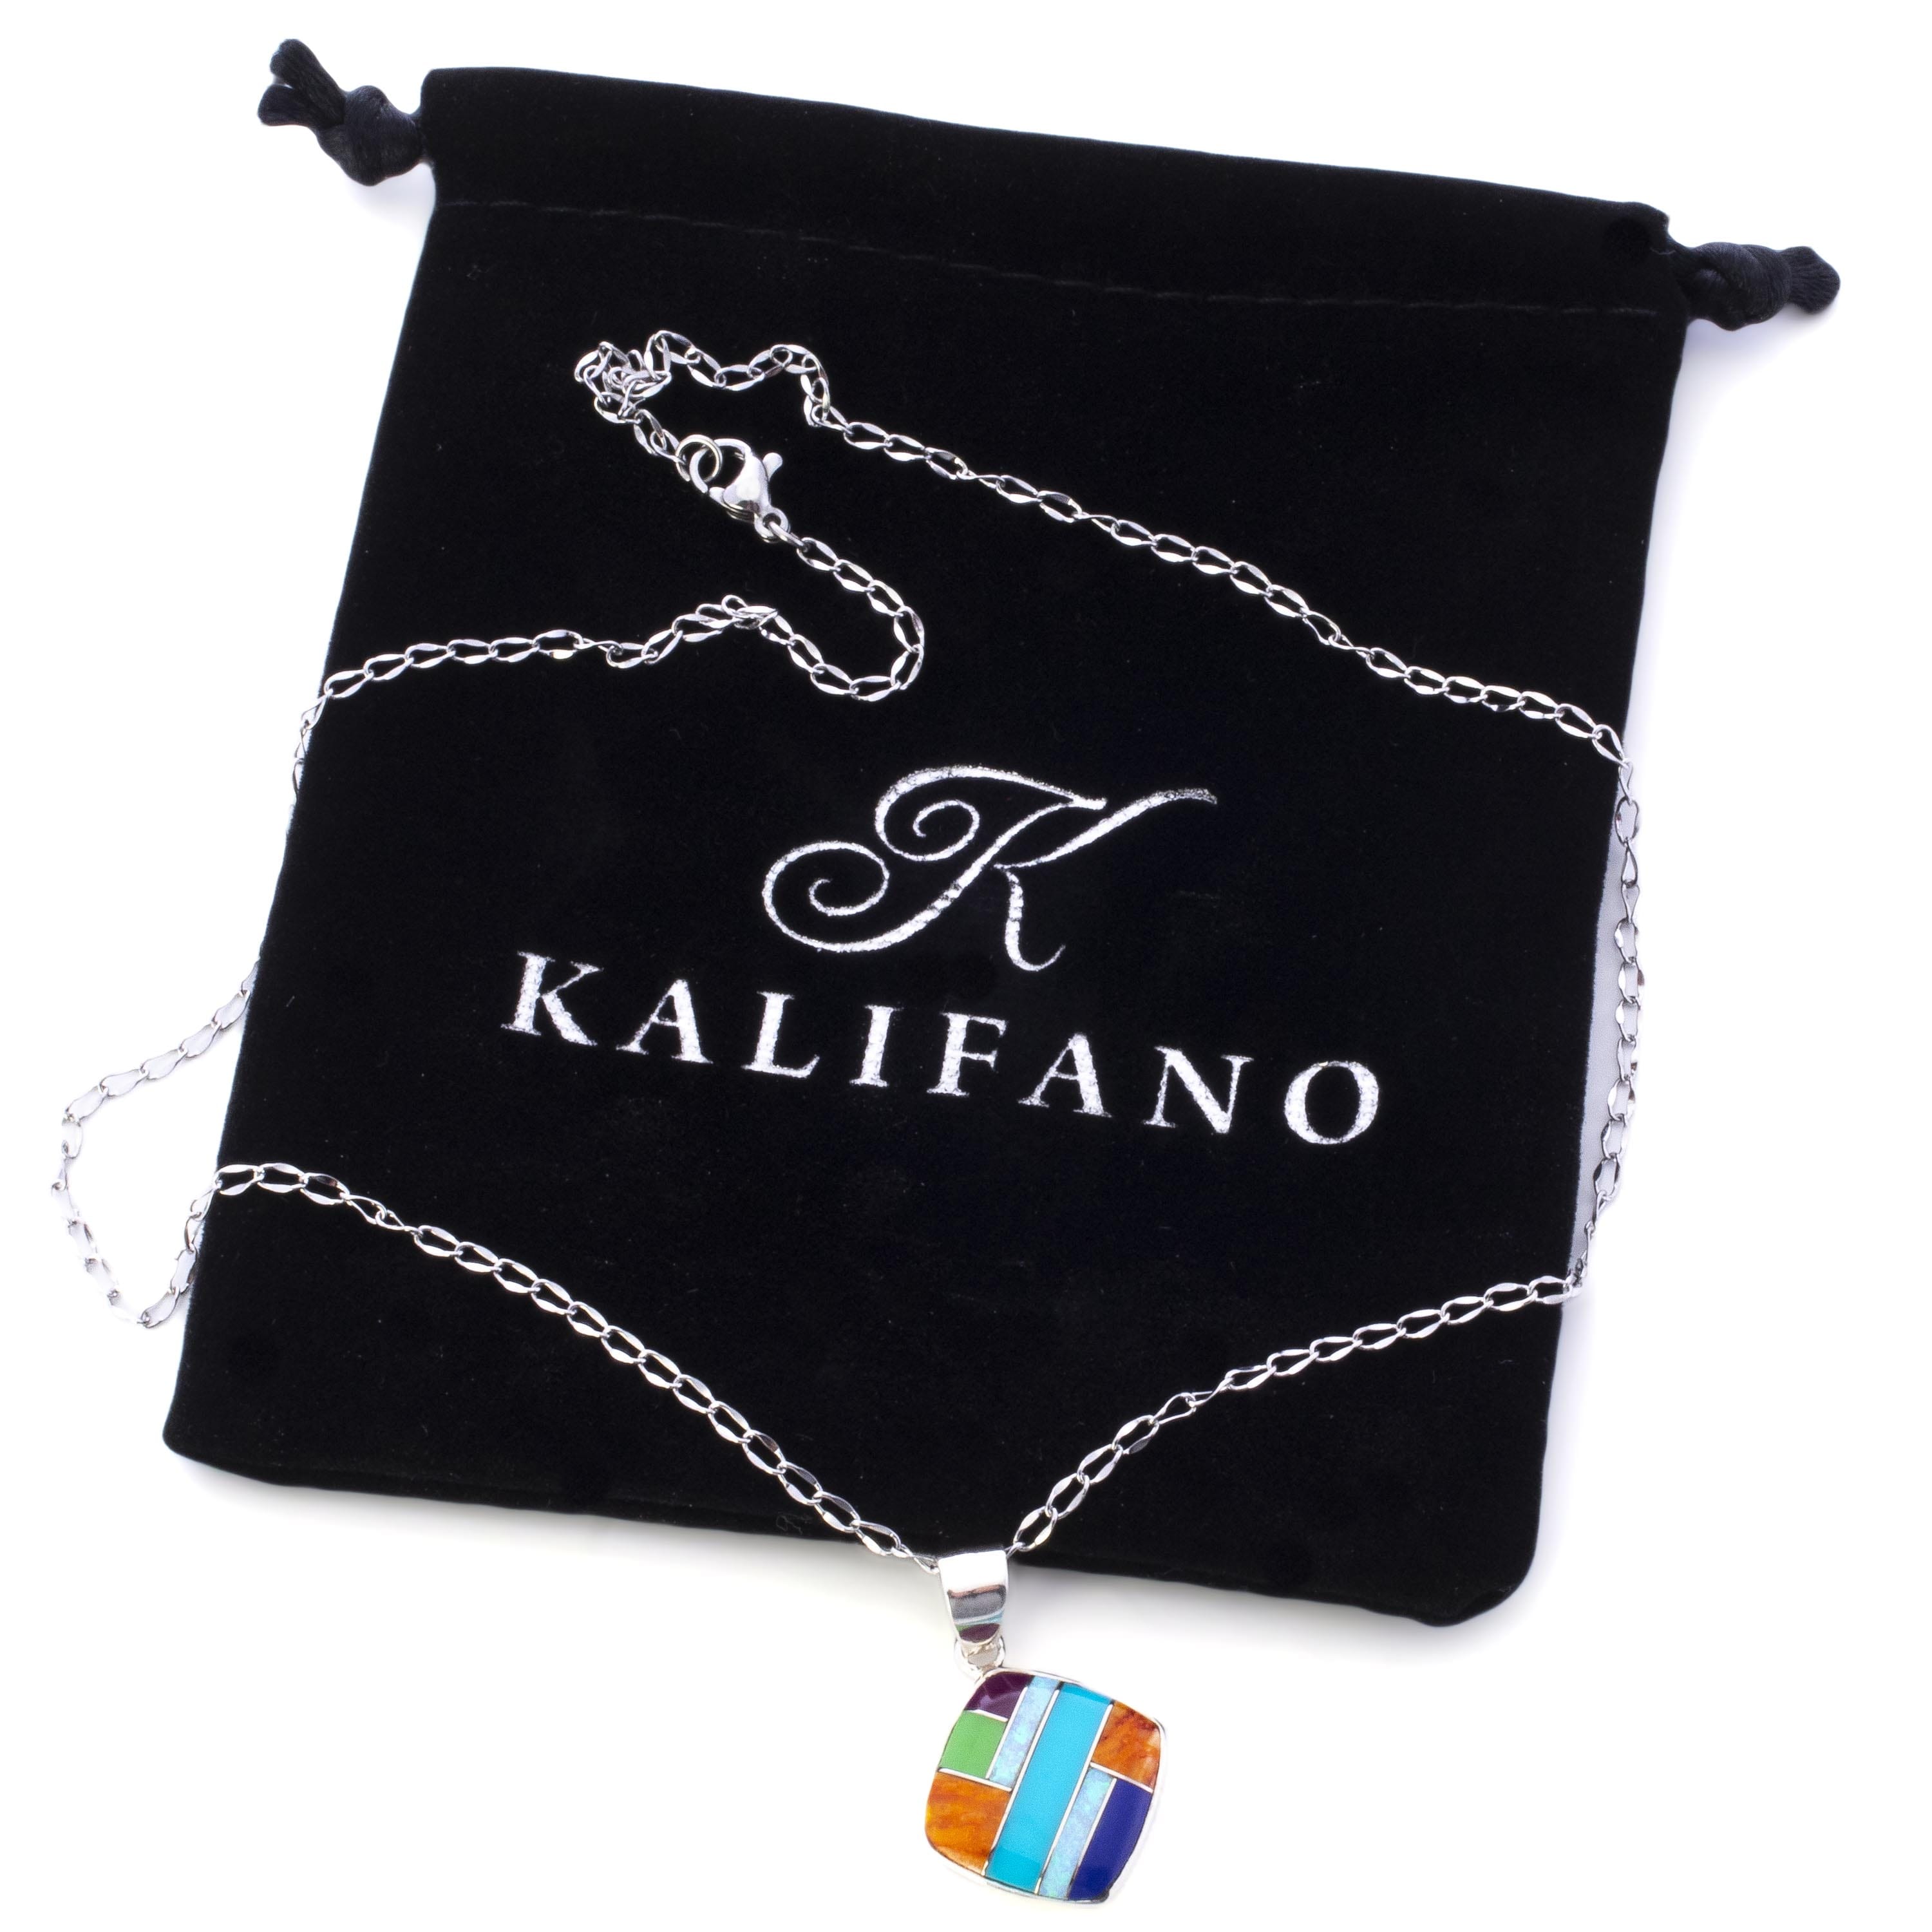 Kalifano Southwest Silver Jewelry Multi Gemstone 925 Sterling Silver Pendant USA Handmade with Opal Accent NMN.2241.MT